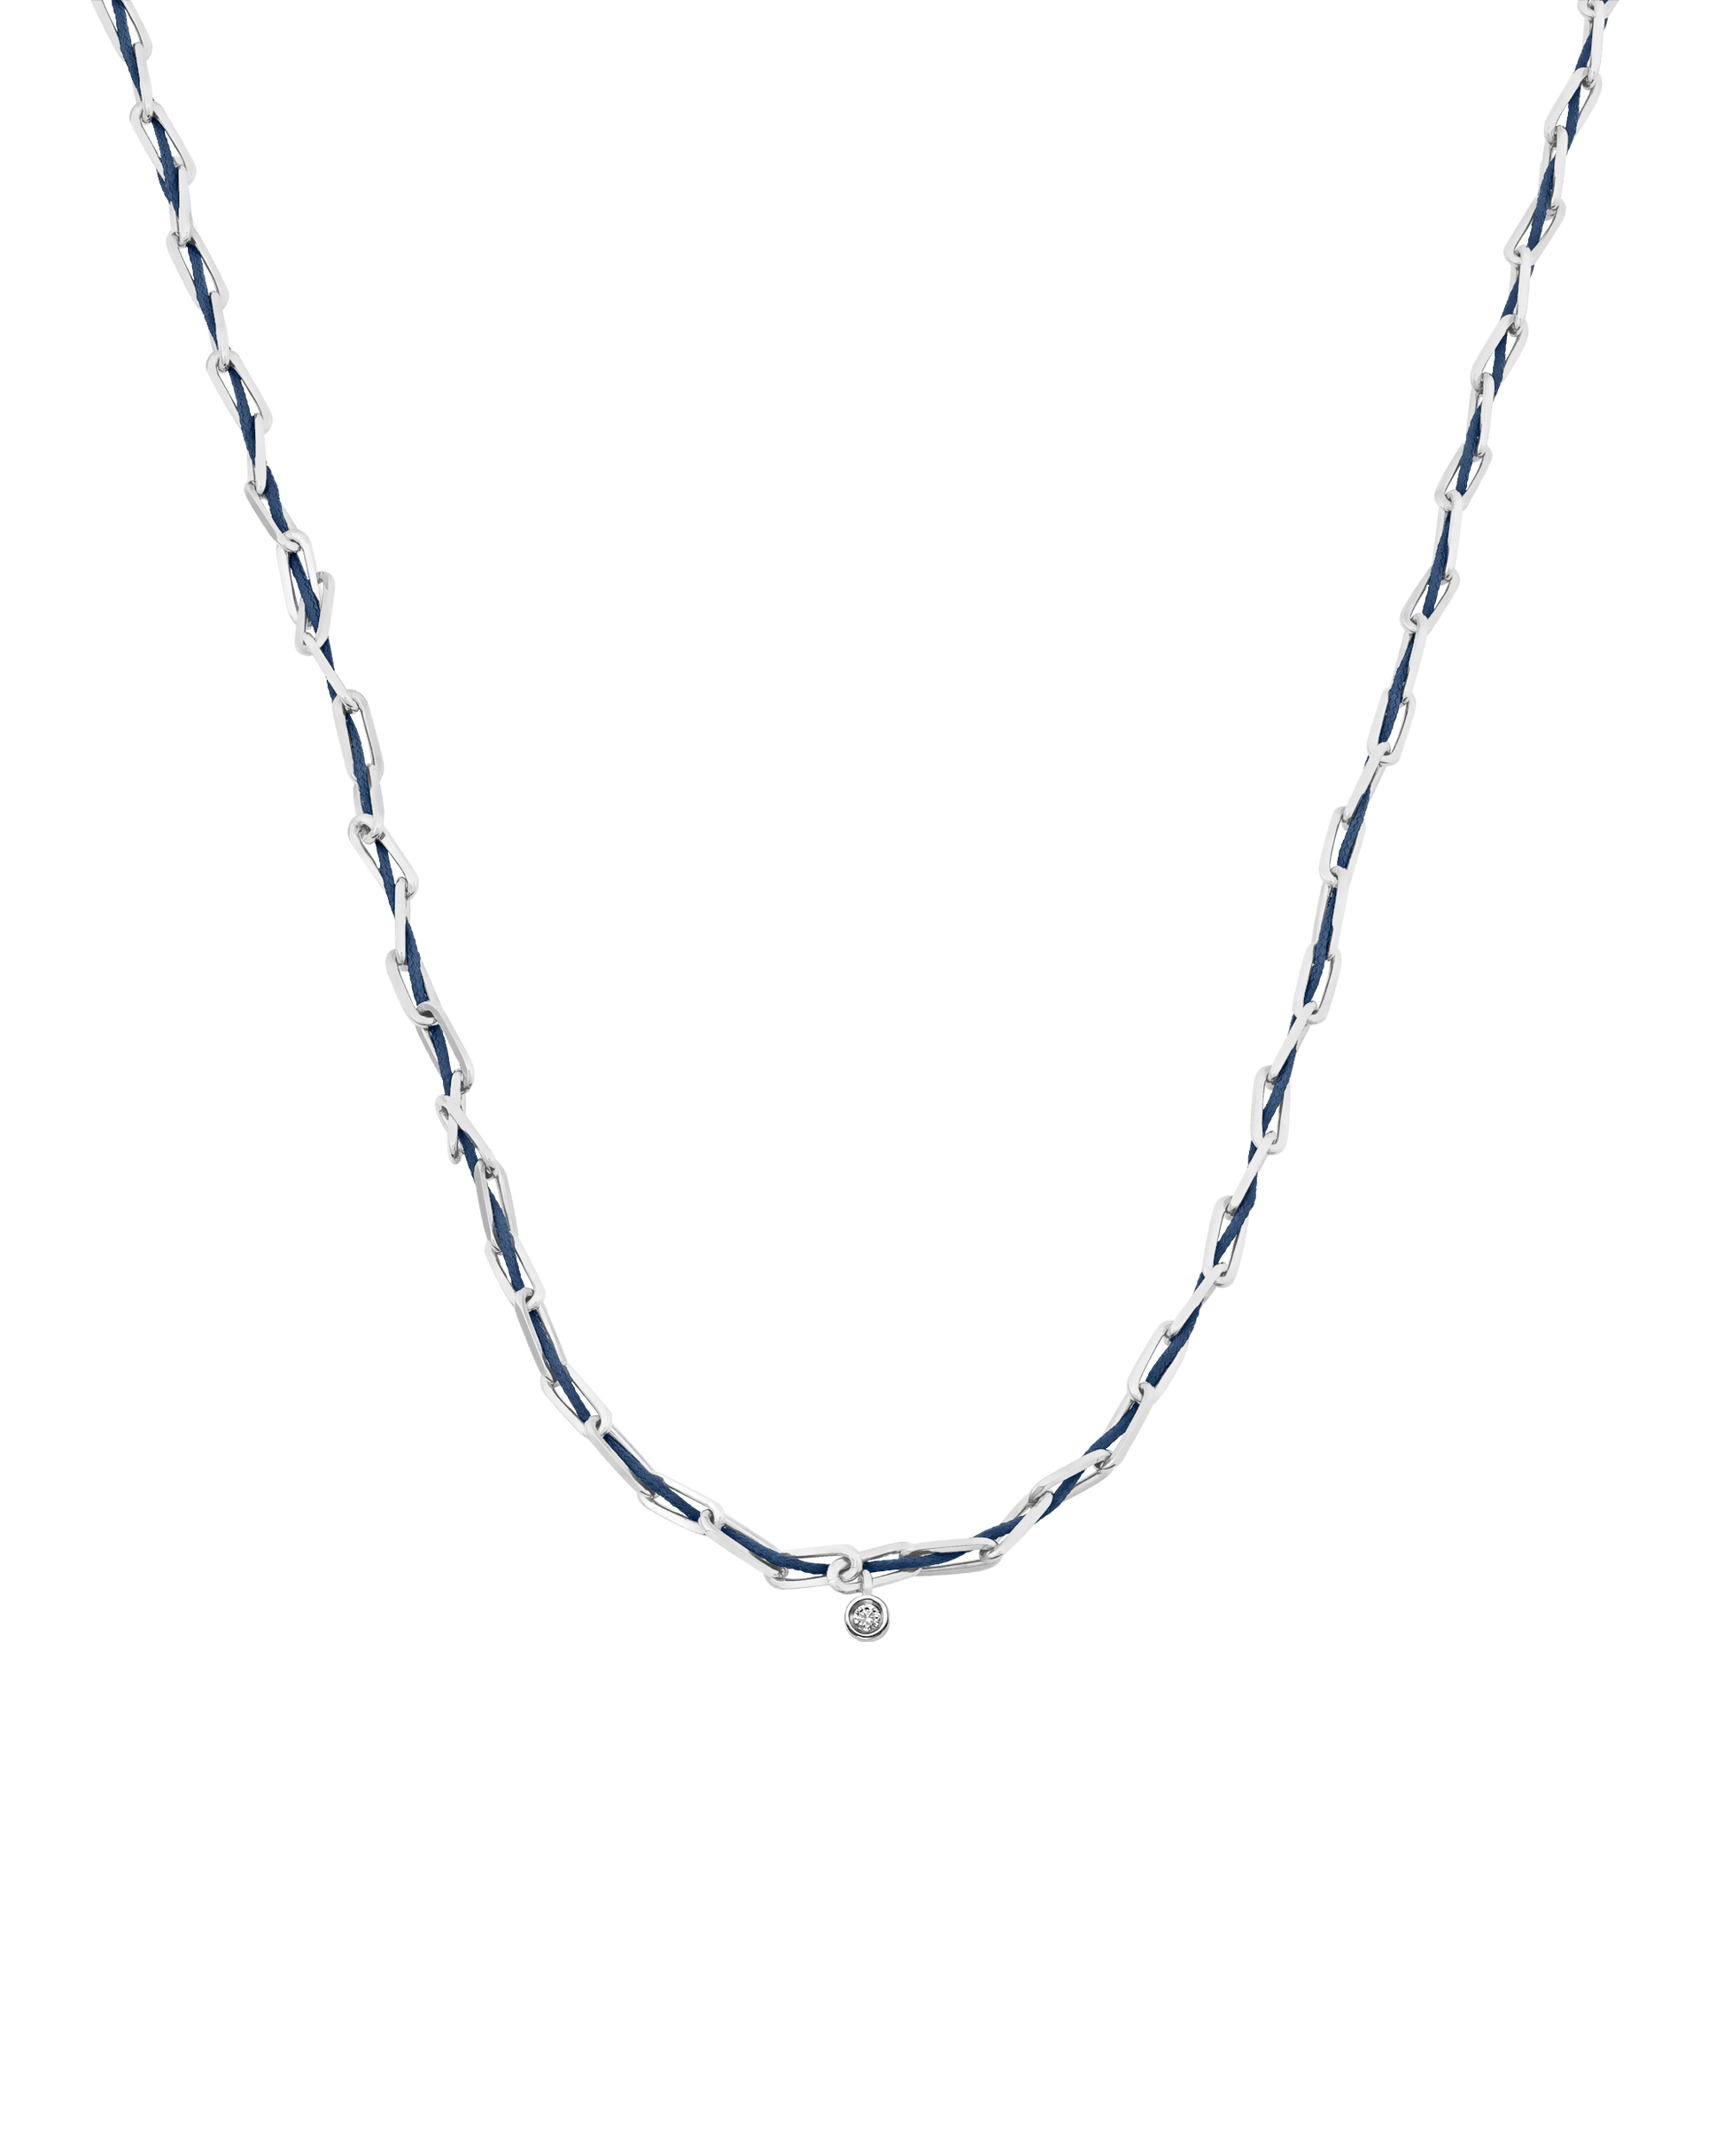 Twine Diamond Necklace - 925 Sterling Silver Necklaces magal-dev Indigo Small: 0.03ct 16"